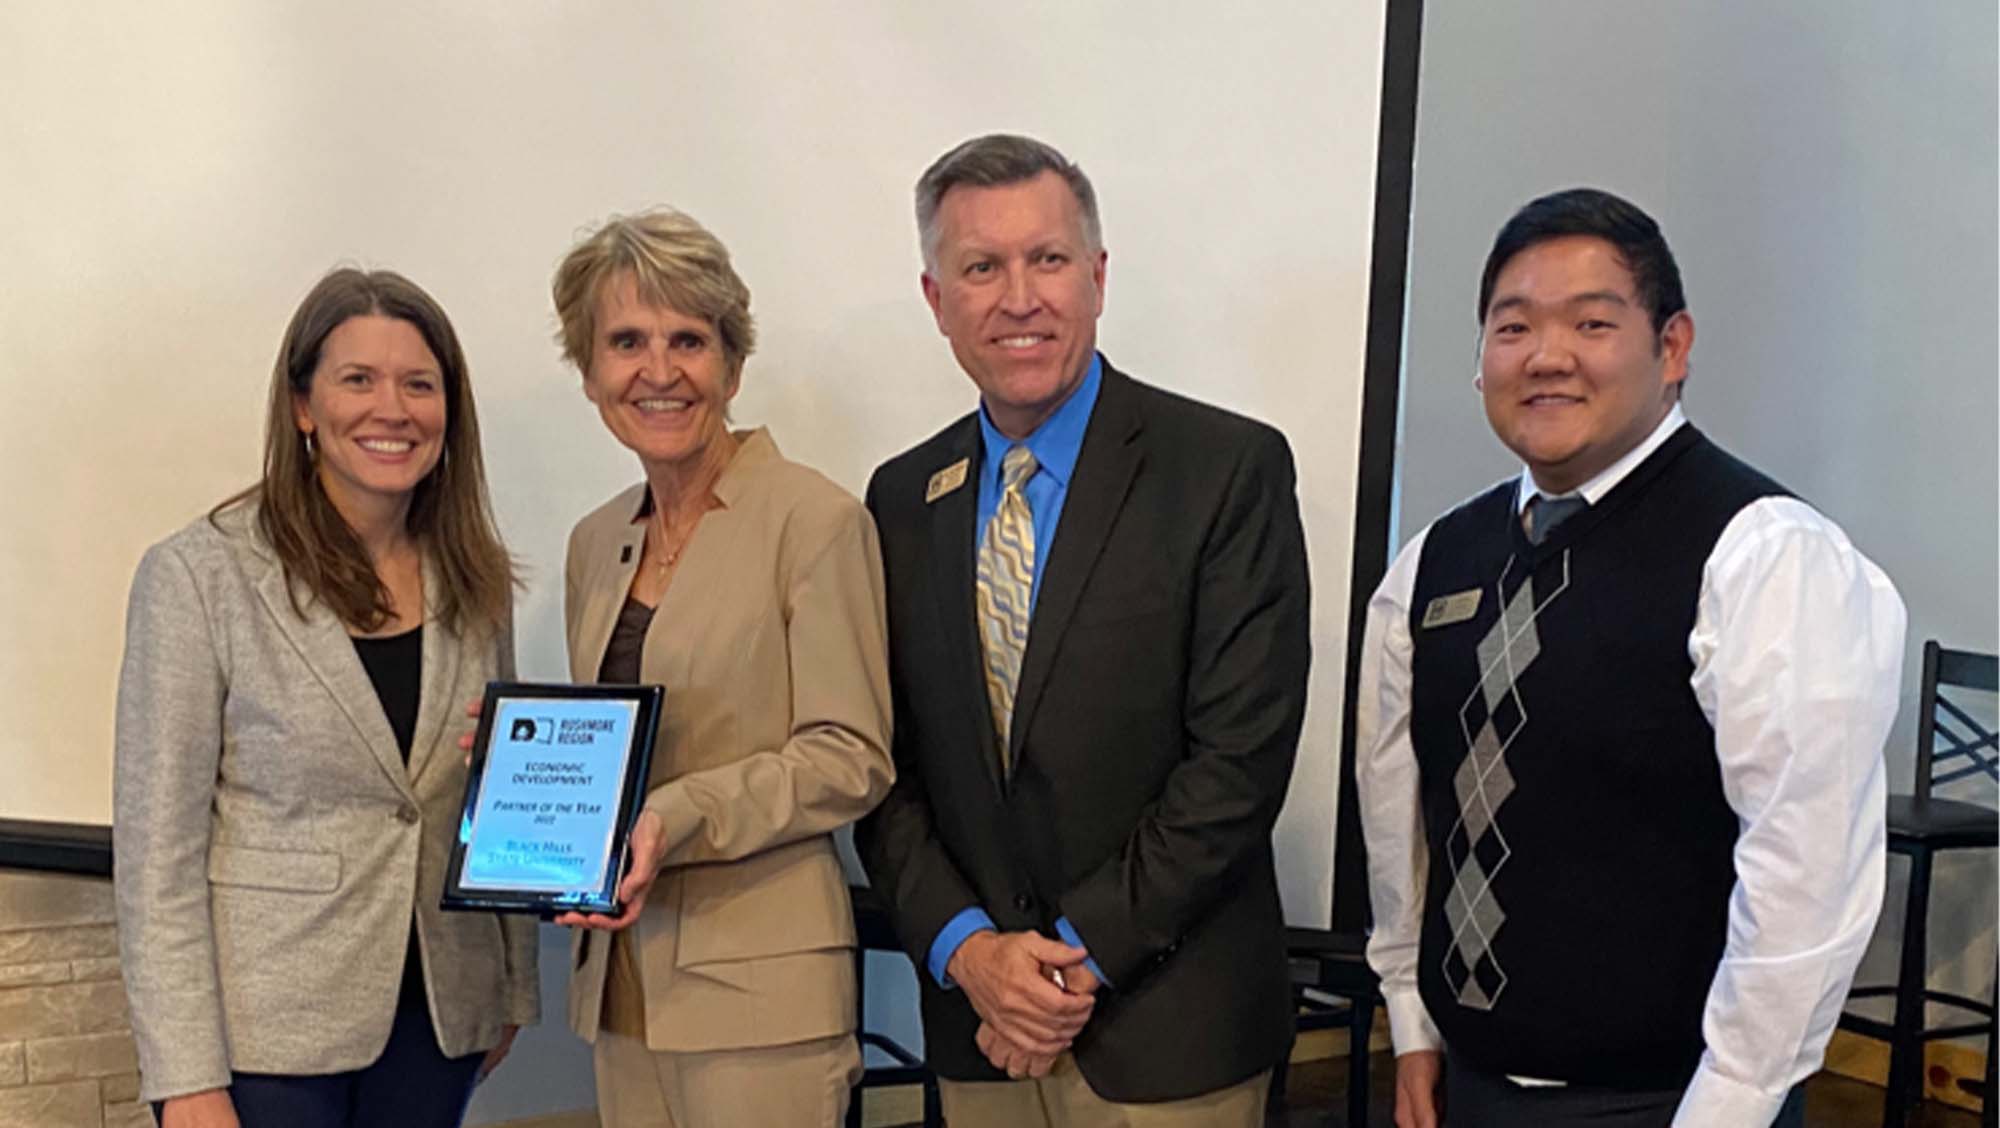 Fran White (left), executive director of BHCED, presents the Rushmore Region Partner of the Year award to BHSU President Laurie S. Nichols, r. Jon Kilpinen, provost and vice president for Academic Affairs, and Jin Kim, director of Career Development at the annual Small Business RoundUP event hosted by 新万博app_新万博体育-娱乐*官网@ Hills Community Economic Development. 